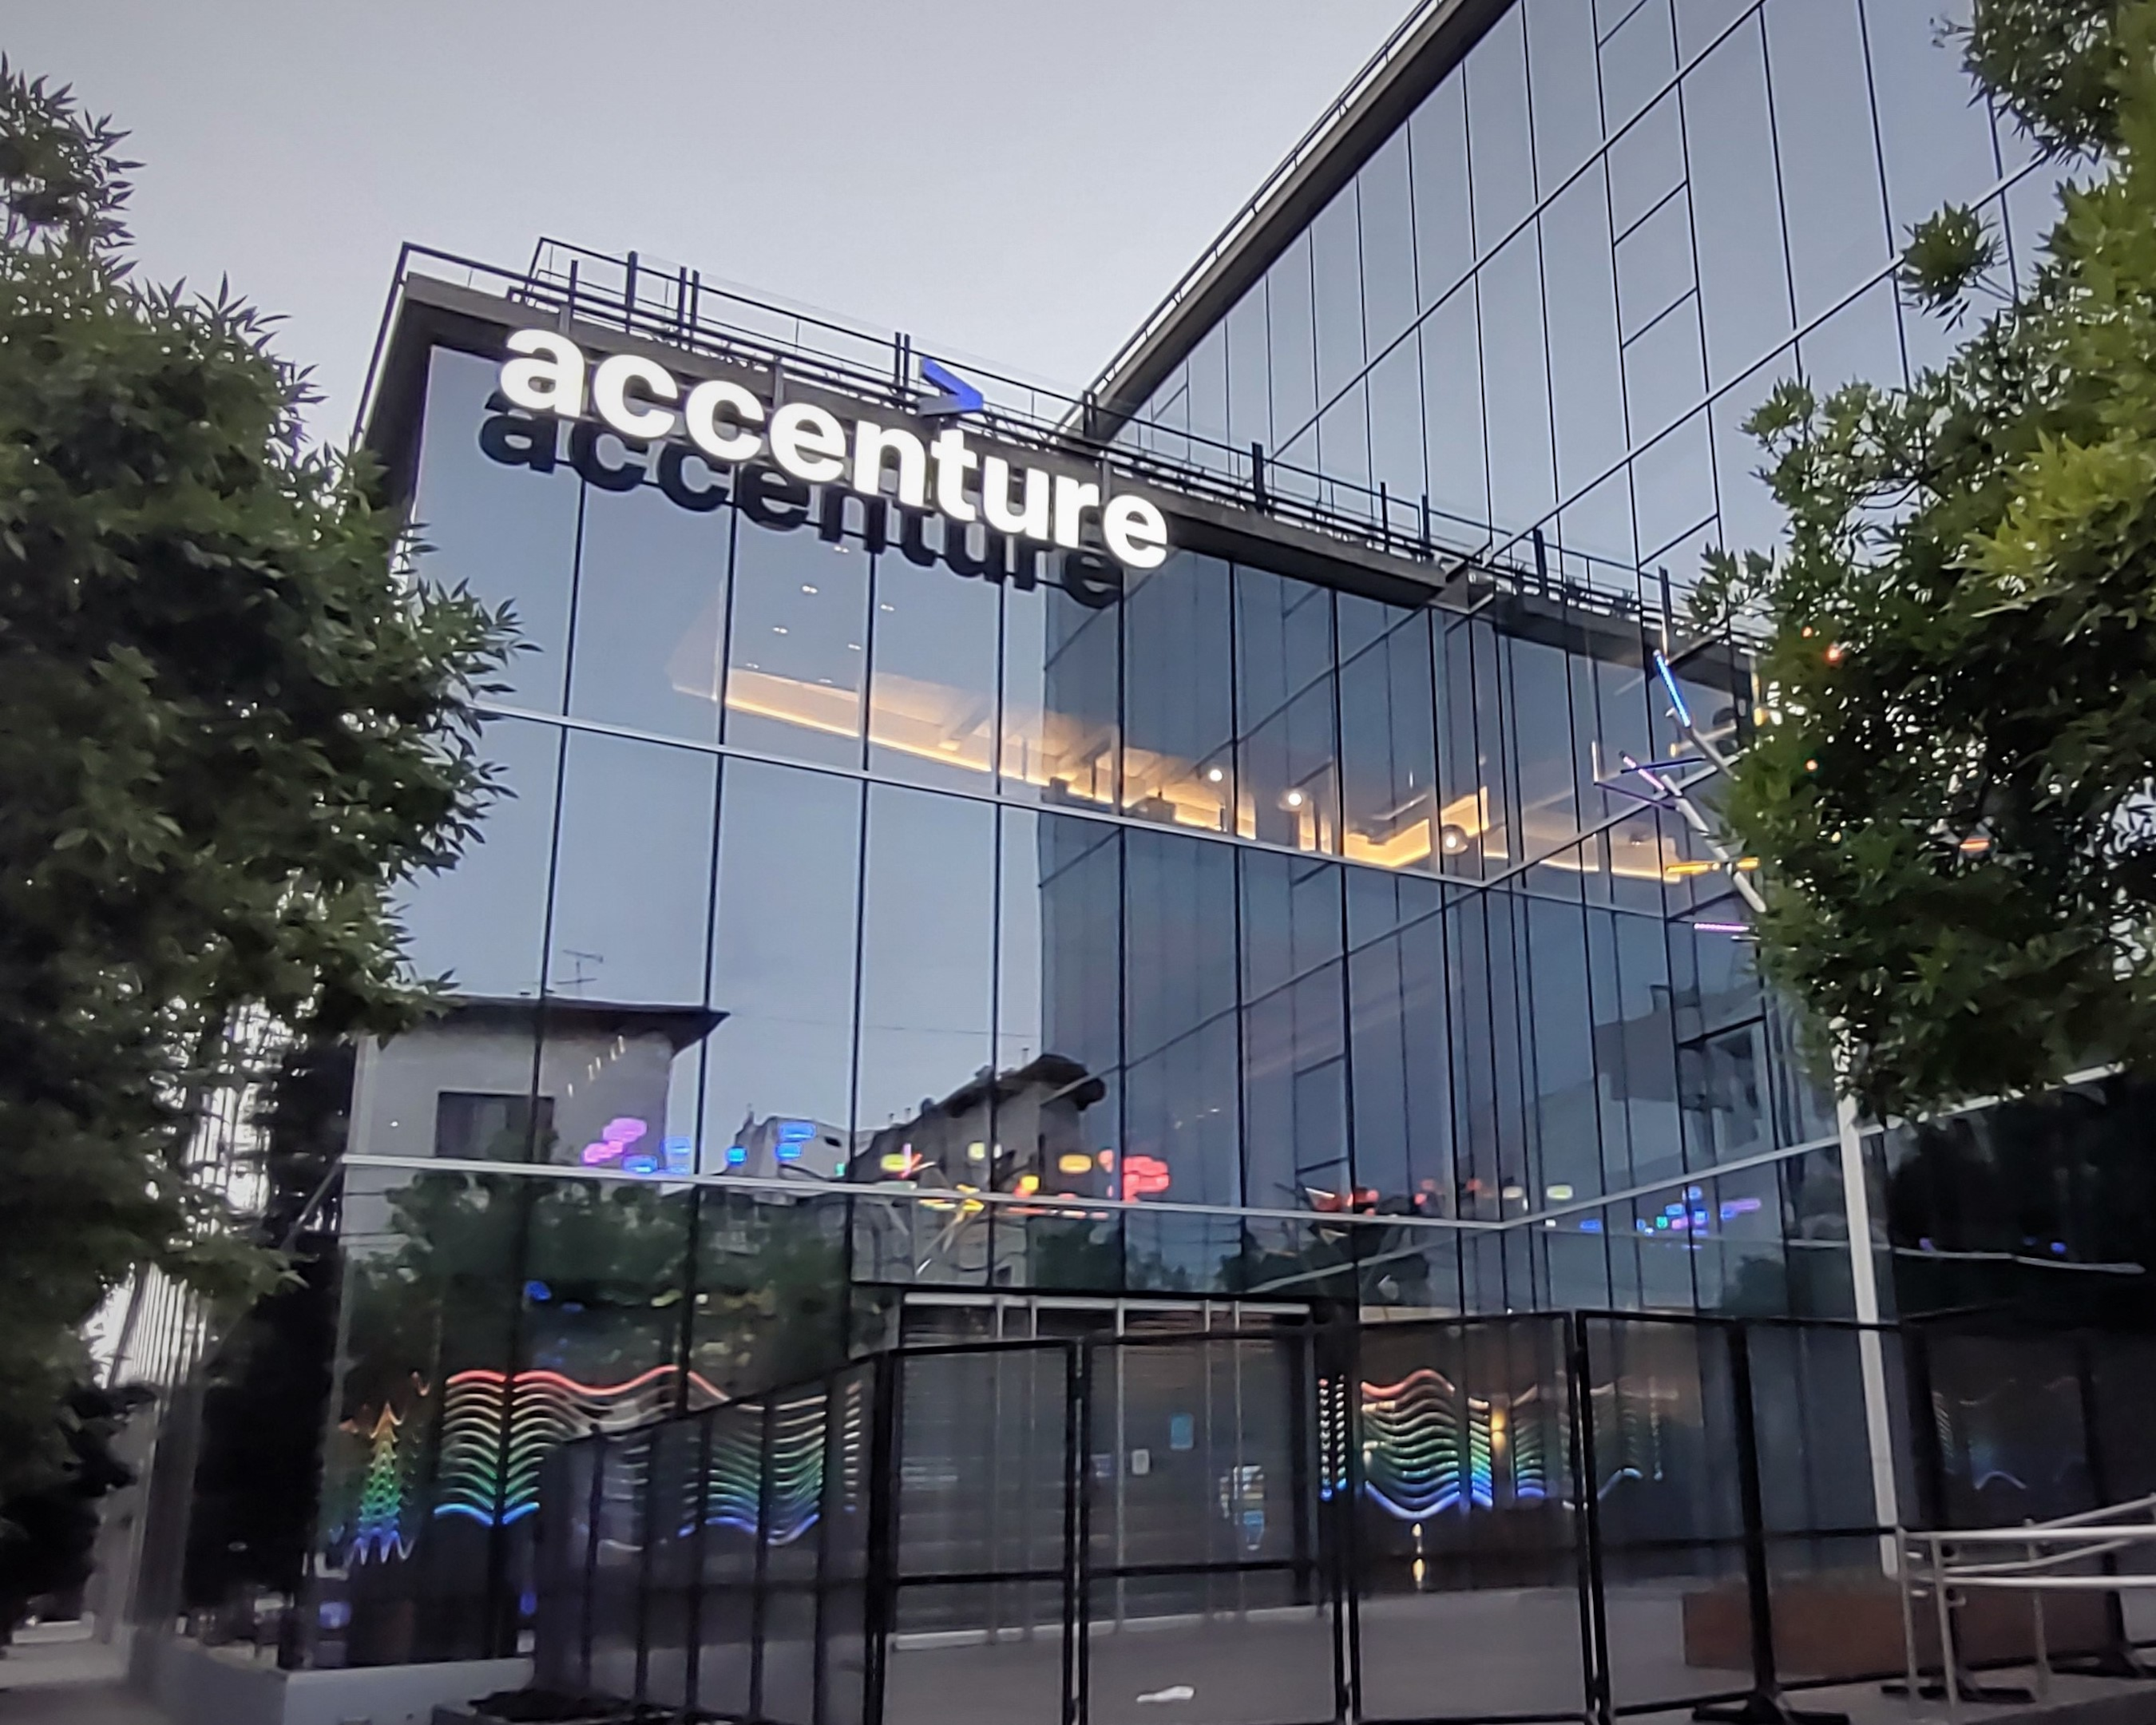 Accenture is one of the largest B2B companies offering consulting services to other businesses